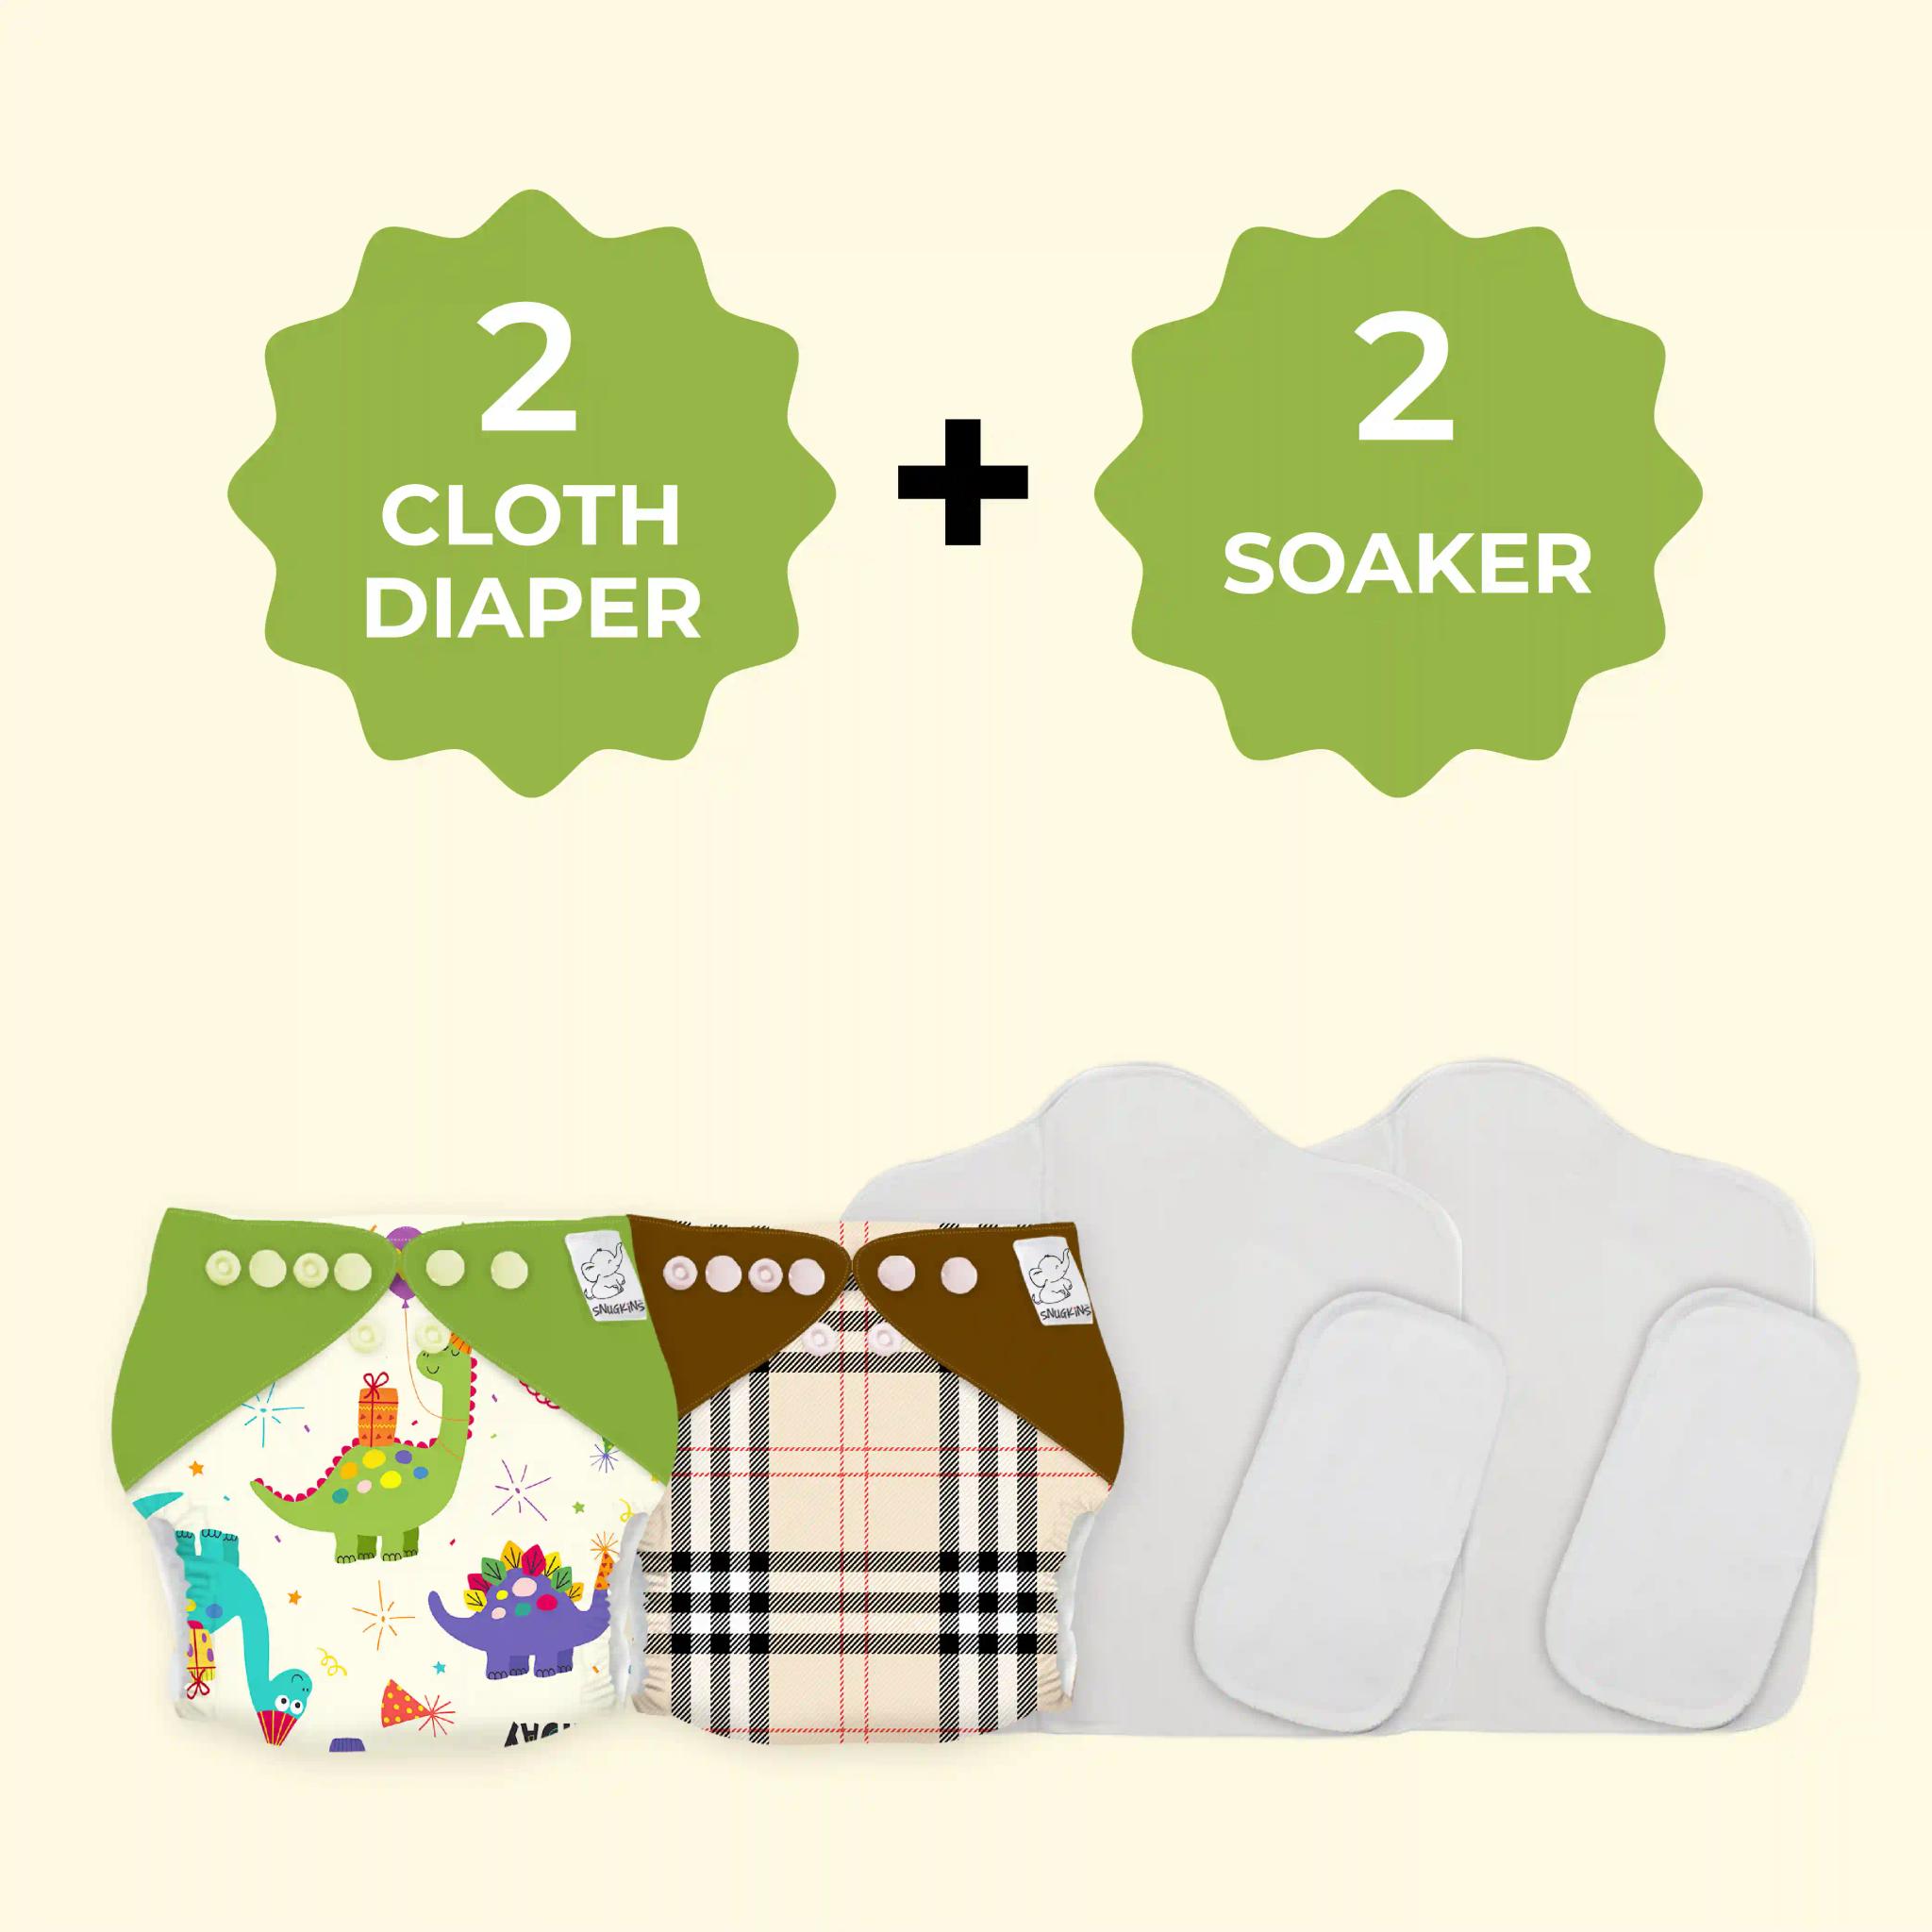 Snugkins New Age Reusable, Waterproof & Washable Cloth Diapers for Babies